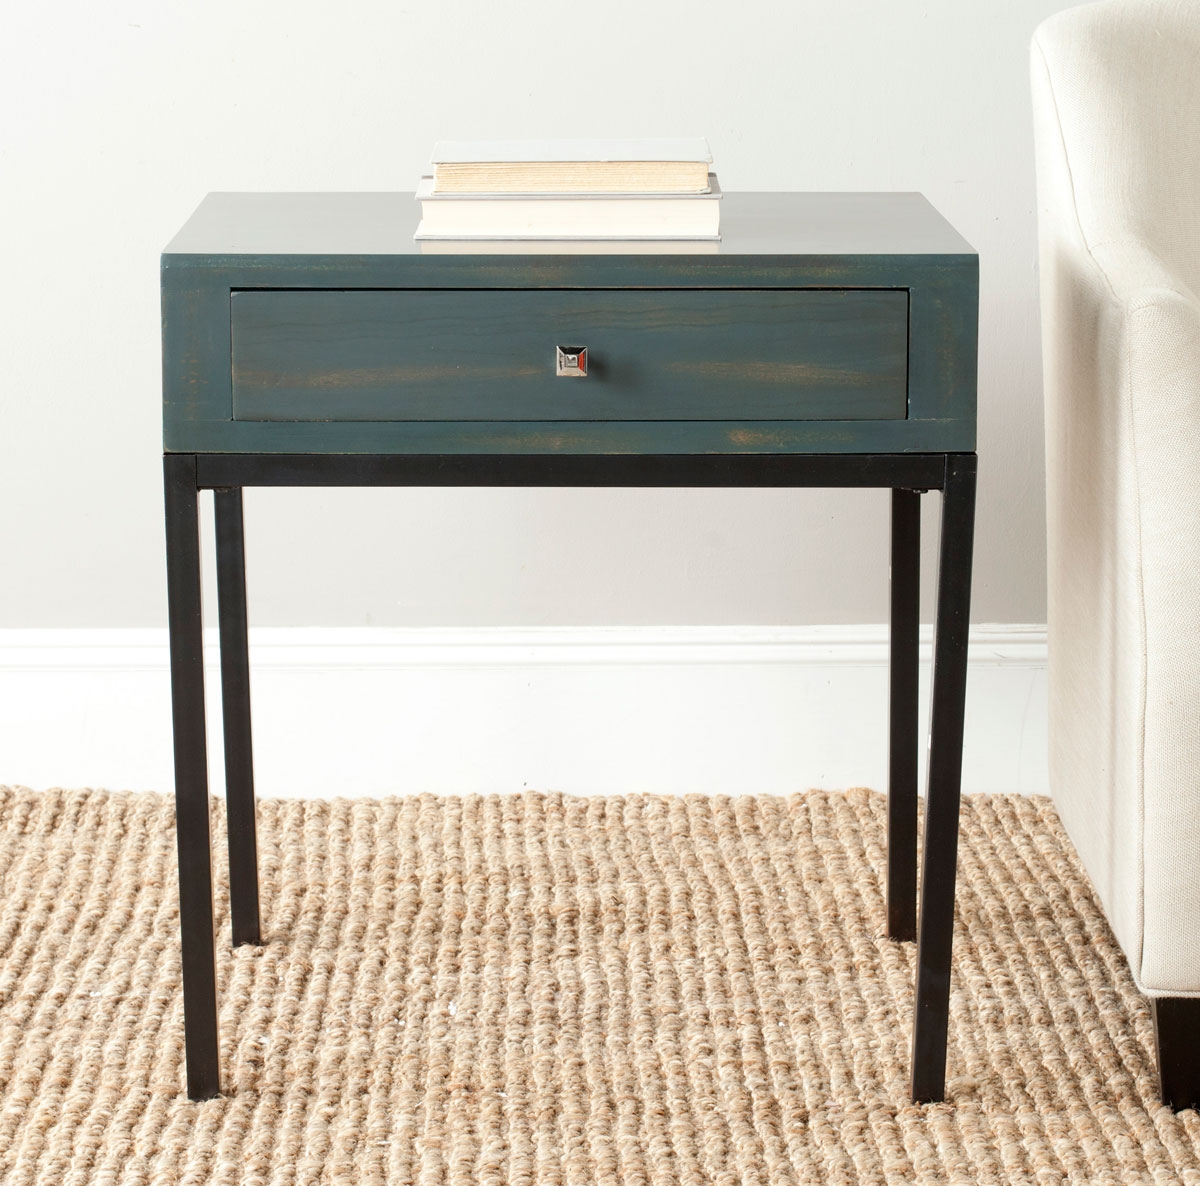 Adena End Table With Storage Drawer - Steel Teal - Arlo Home - Image 2